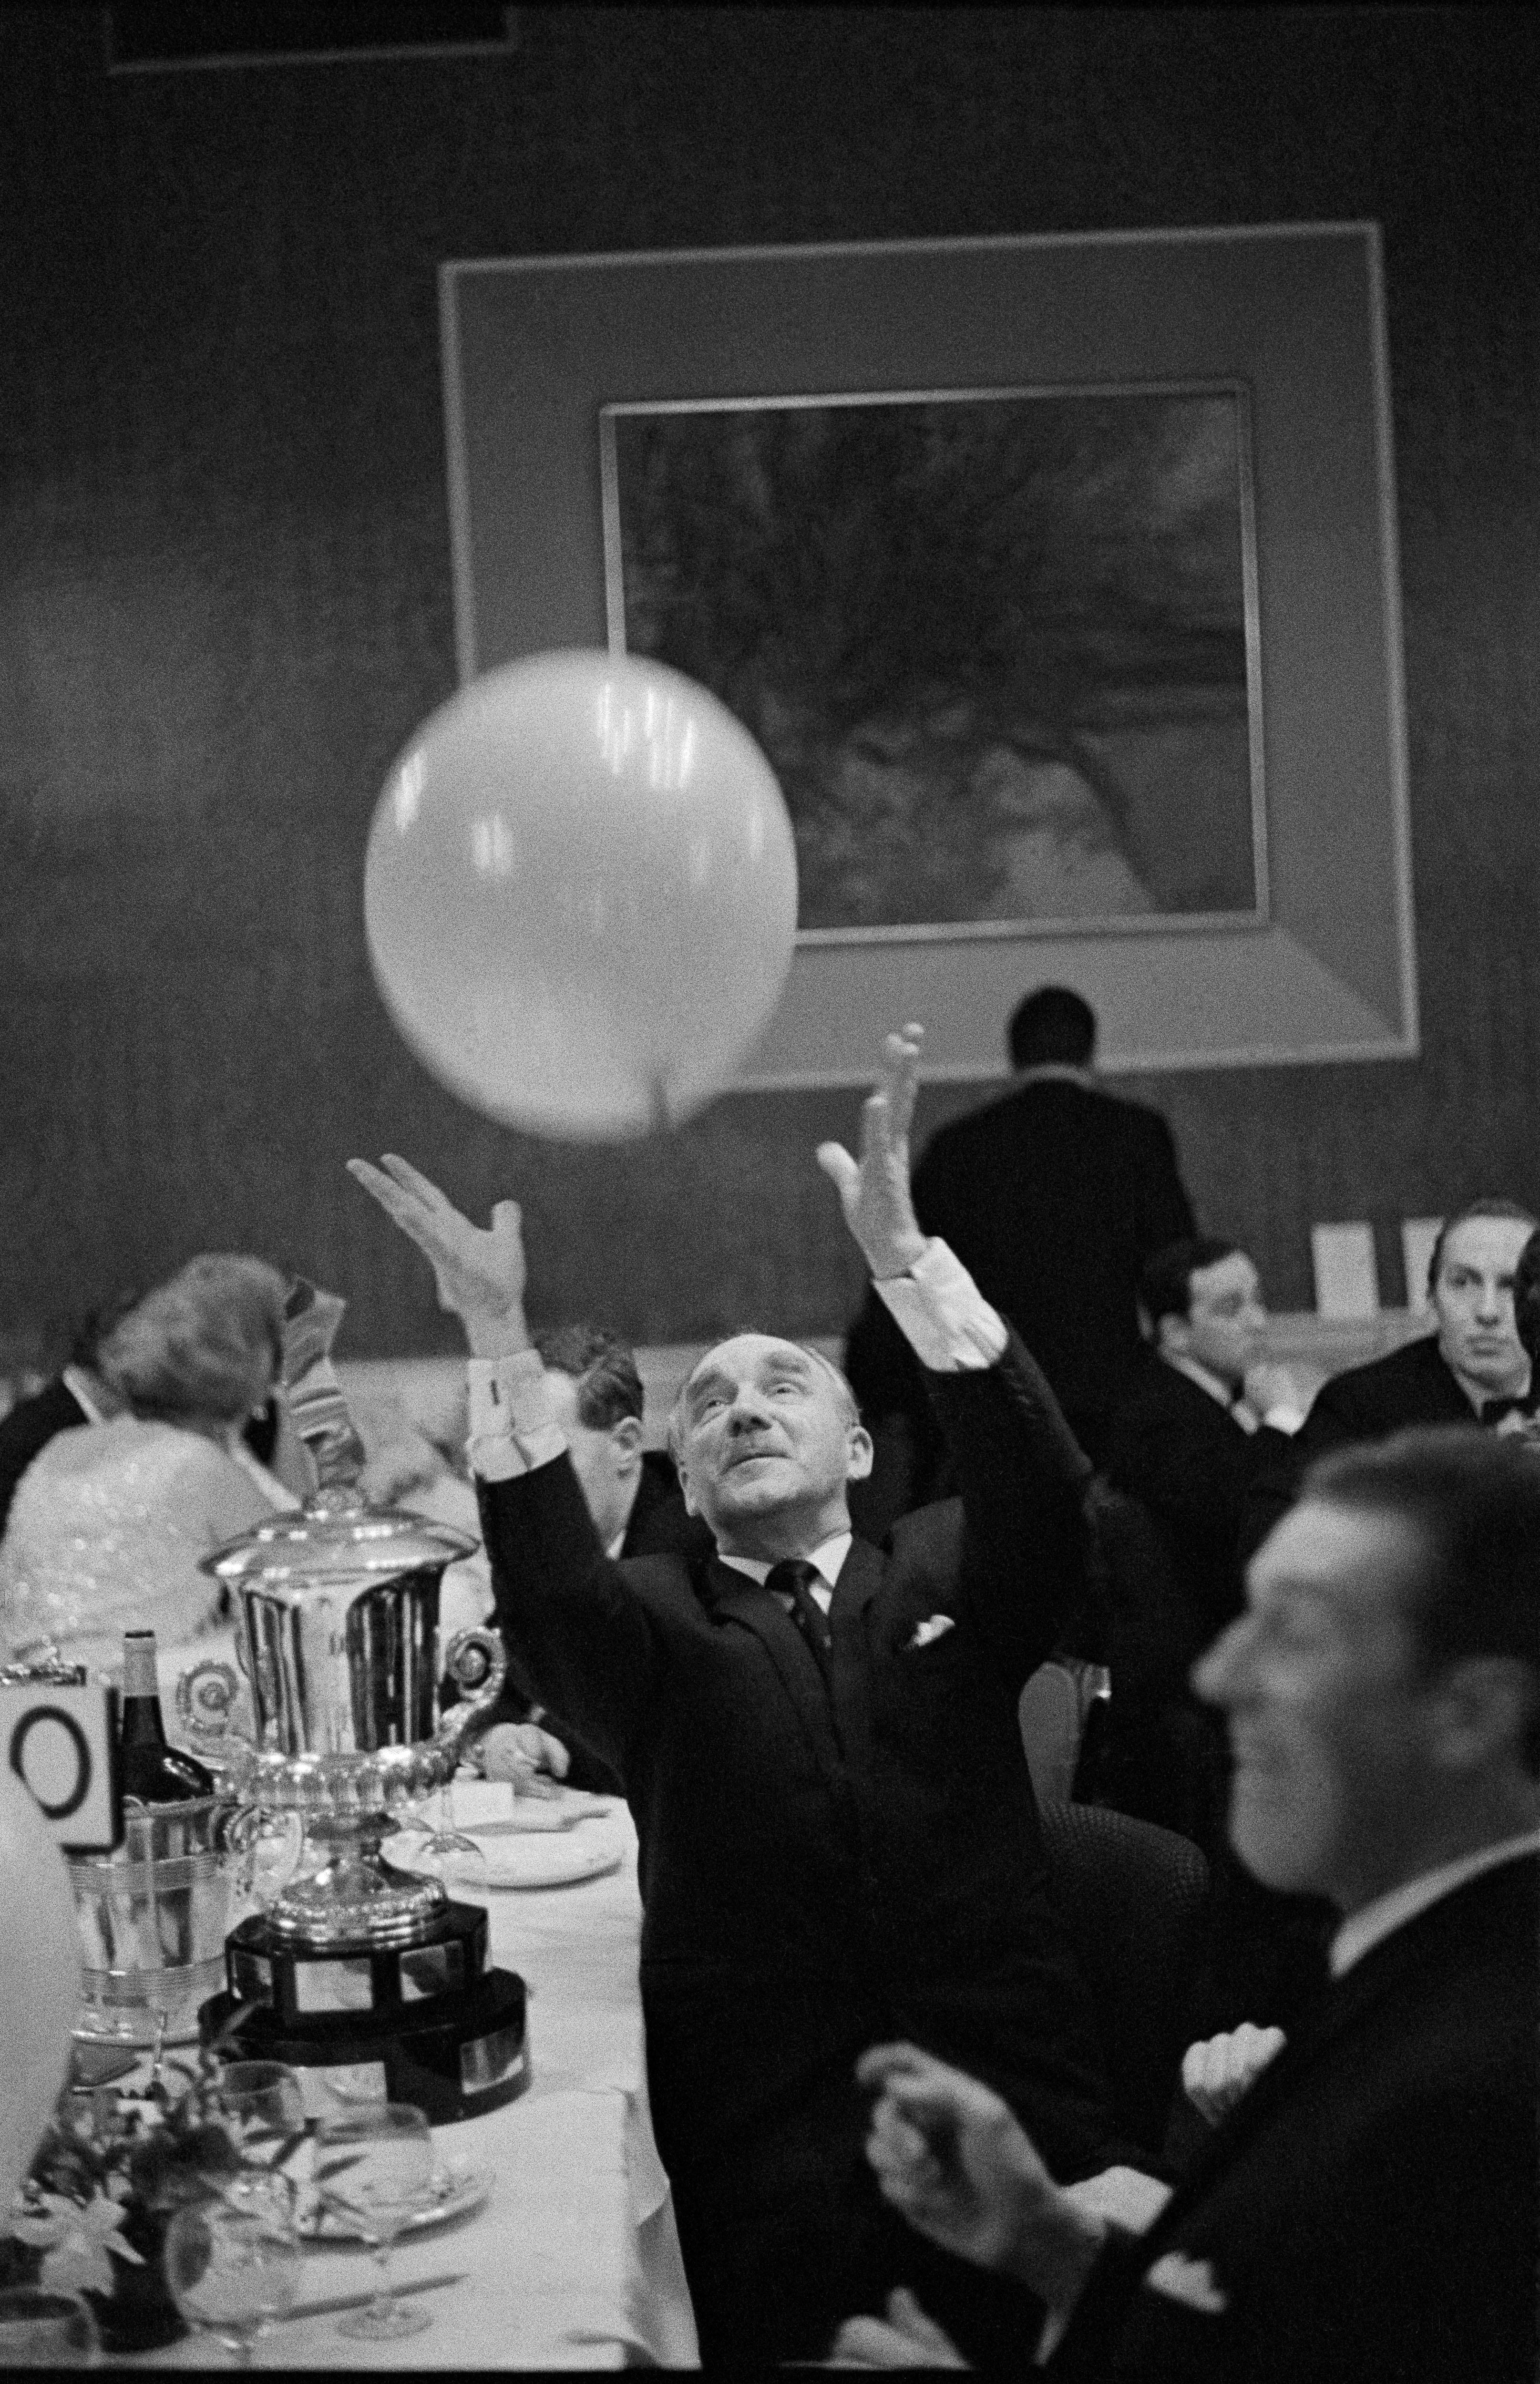 Retired gentleman at the MG Car owners Ball 1967 Copyright David Hurn Magnum Photos